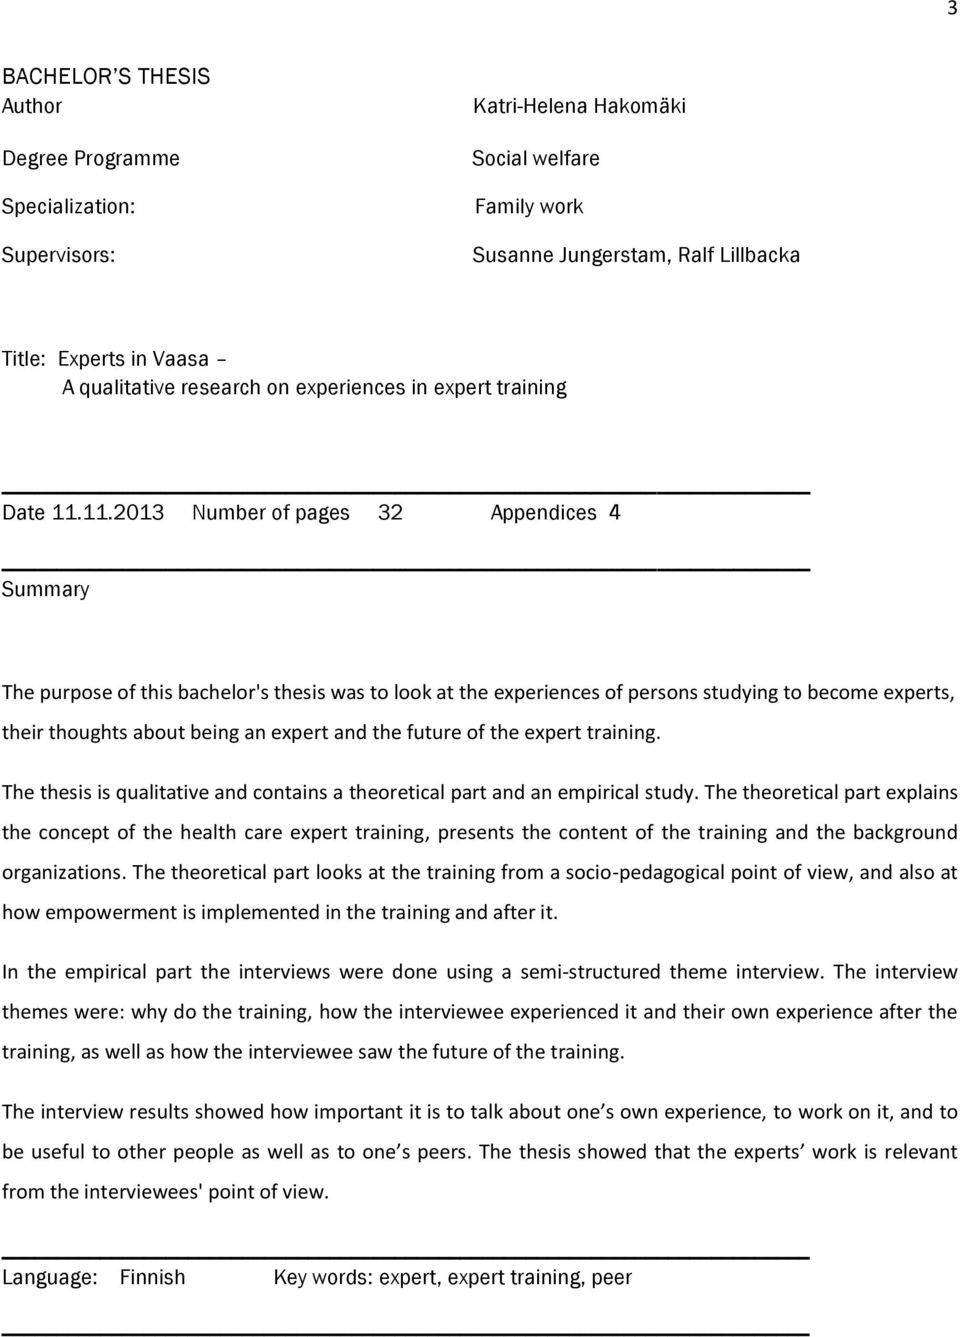 11.2013 Number of pages 32 Appendices 4 Summary The purpose of this bachelor's thesis was to look at the experiences of persons studying to become experts, their thoughts about being an expert and